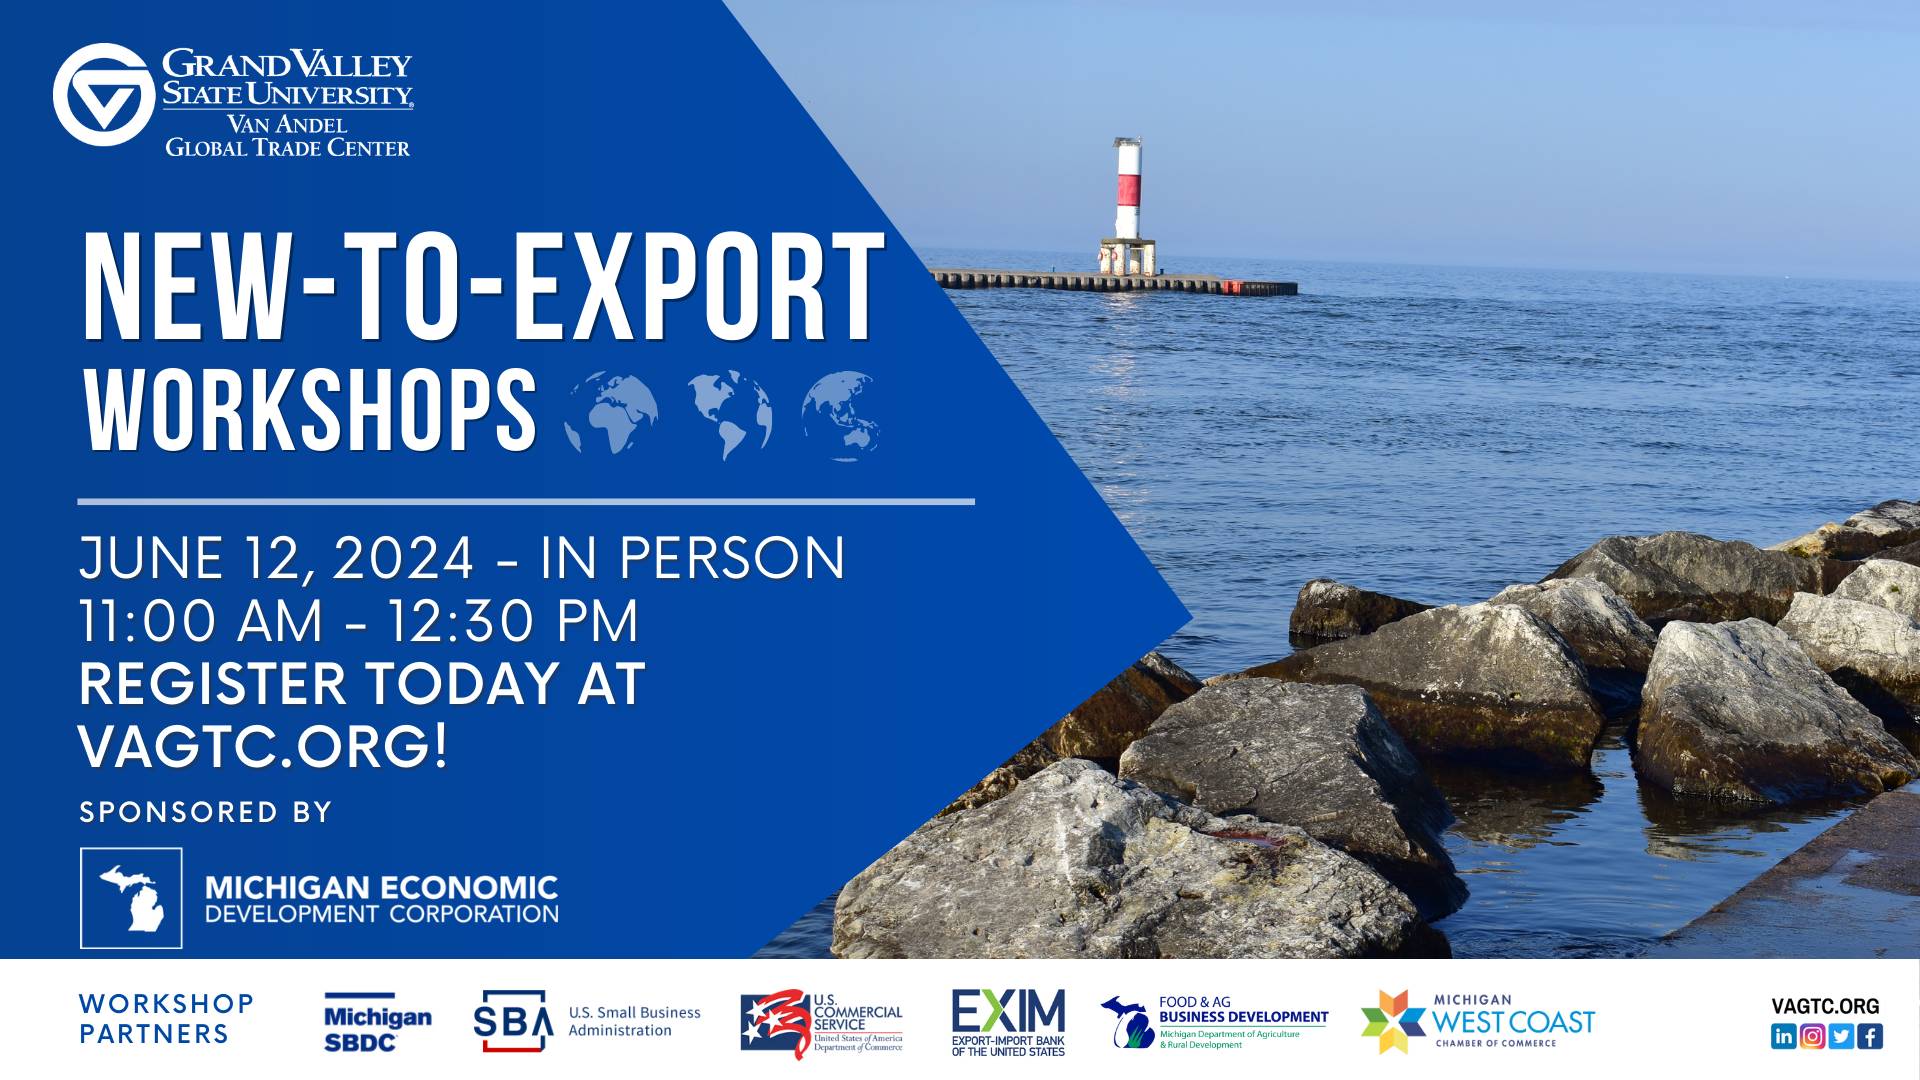 New-to-Export West Michigan - Michigan West Coast Chamber of Commerce 2024